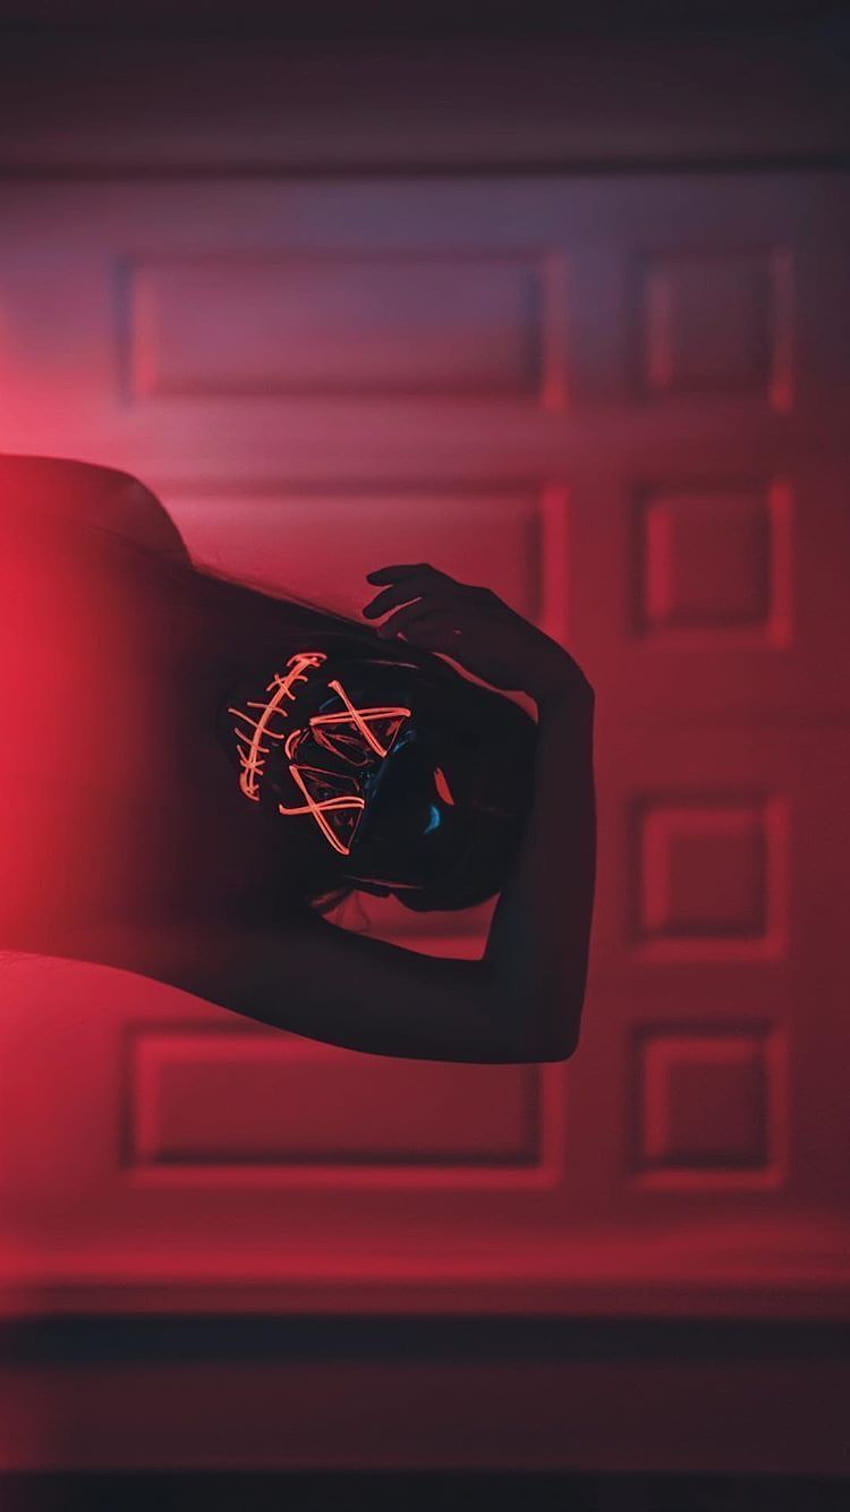 A person holding a neon mask in a red-lit room - Horror